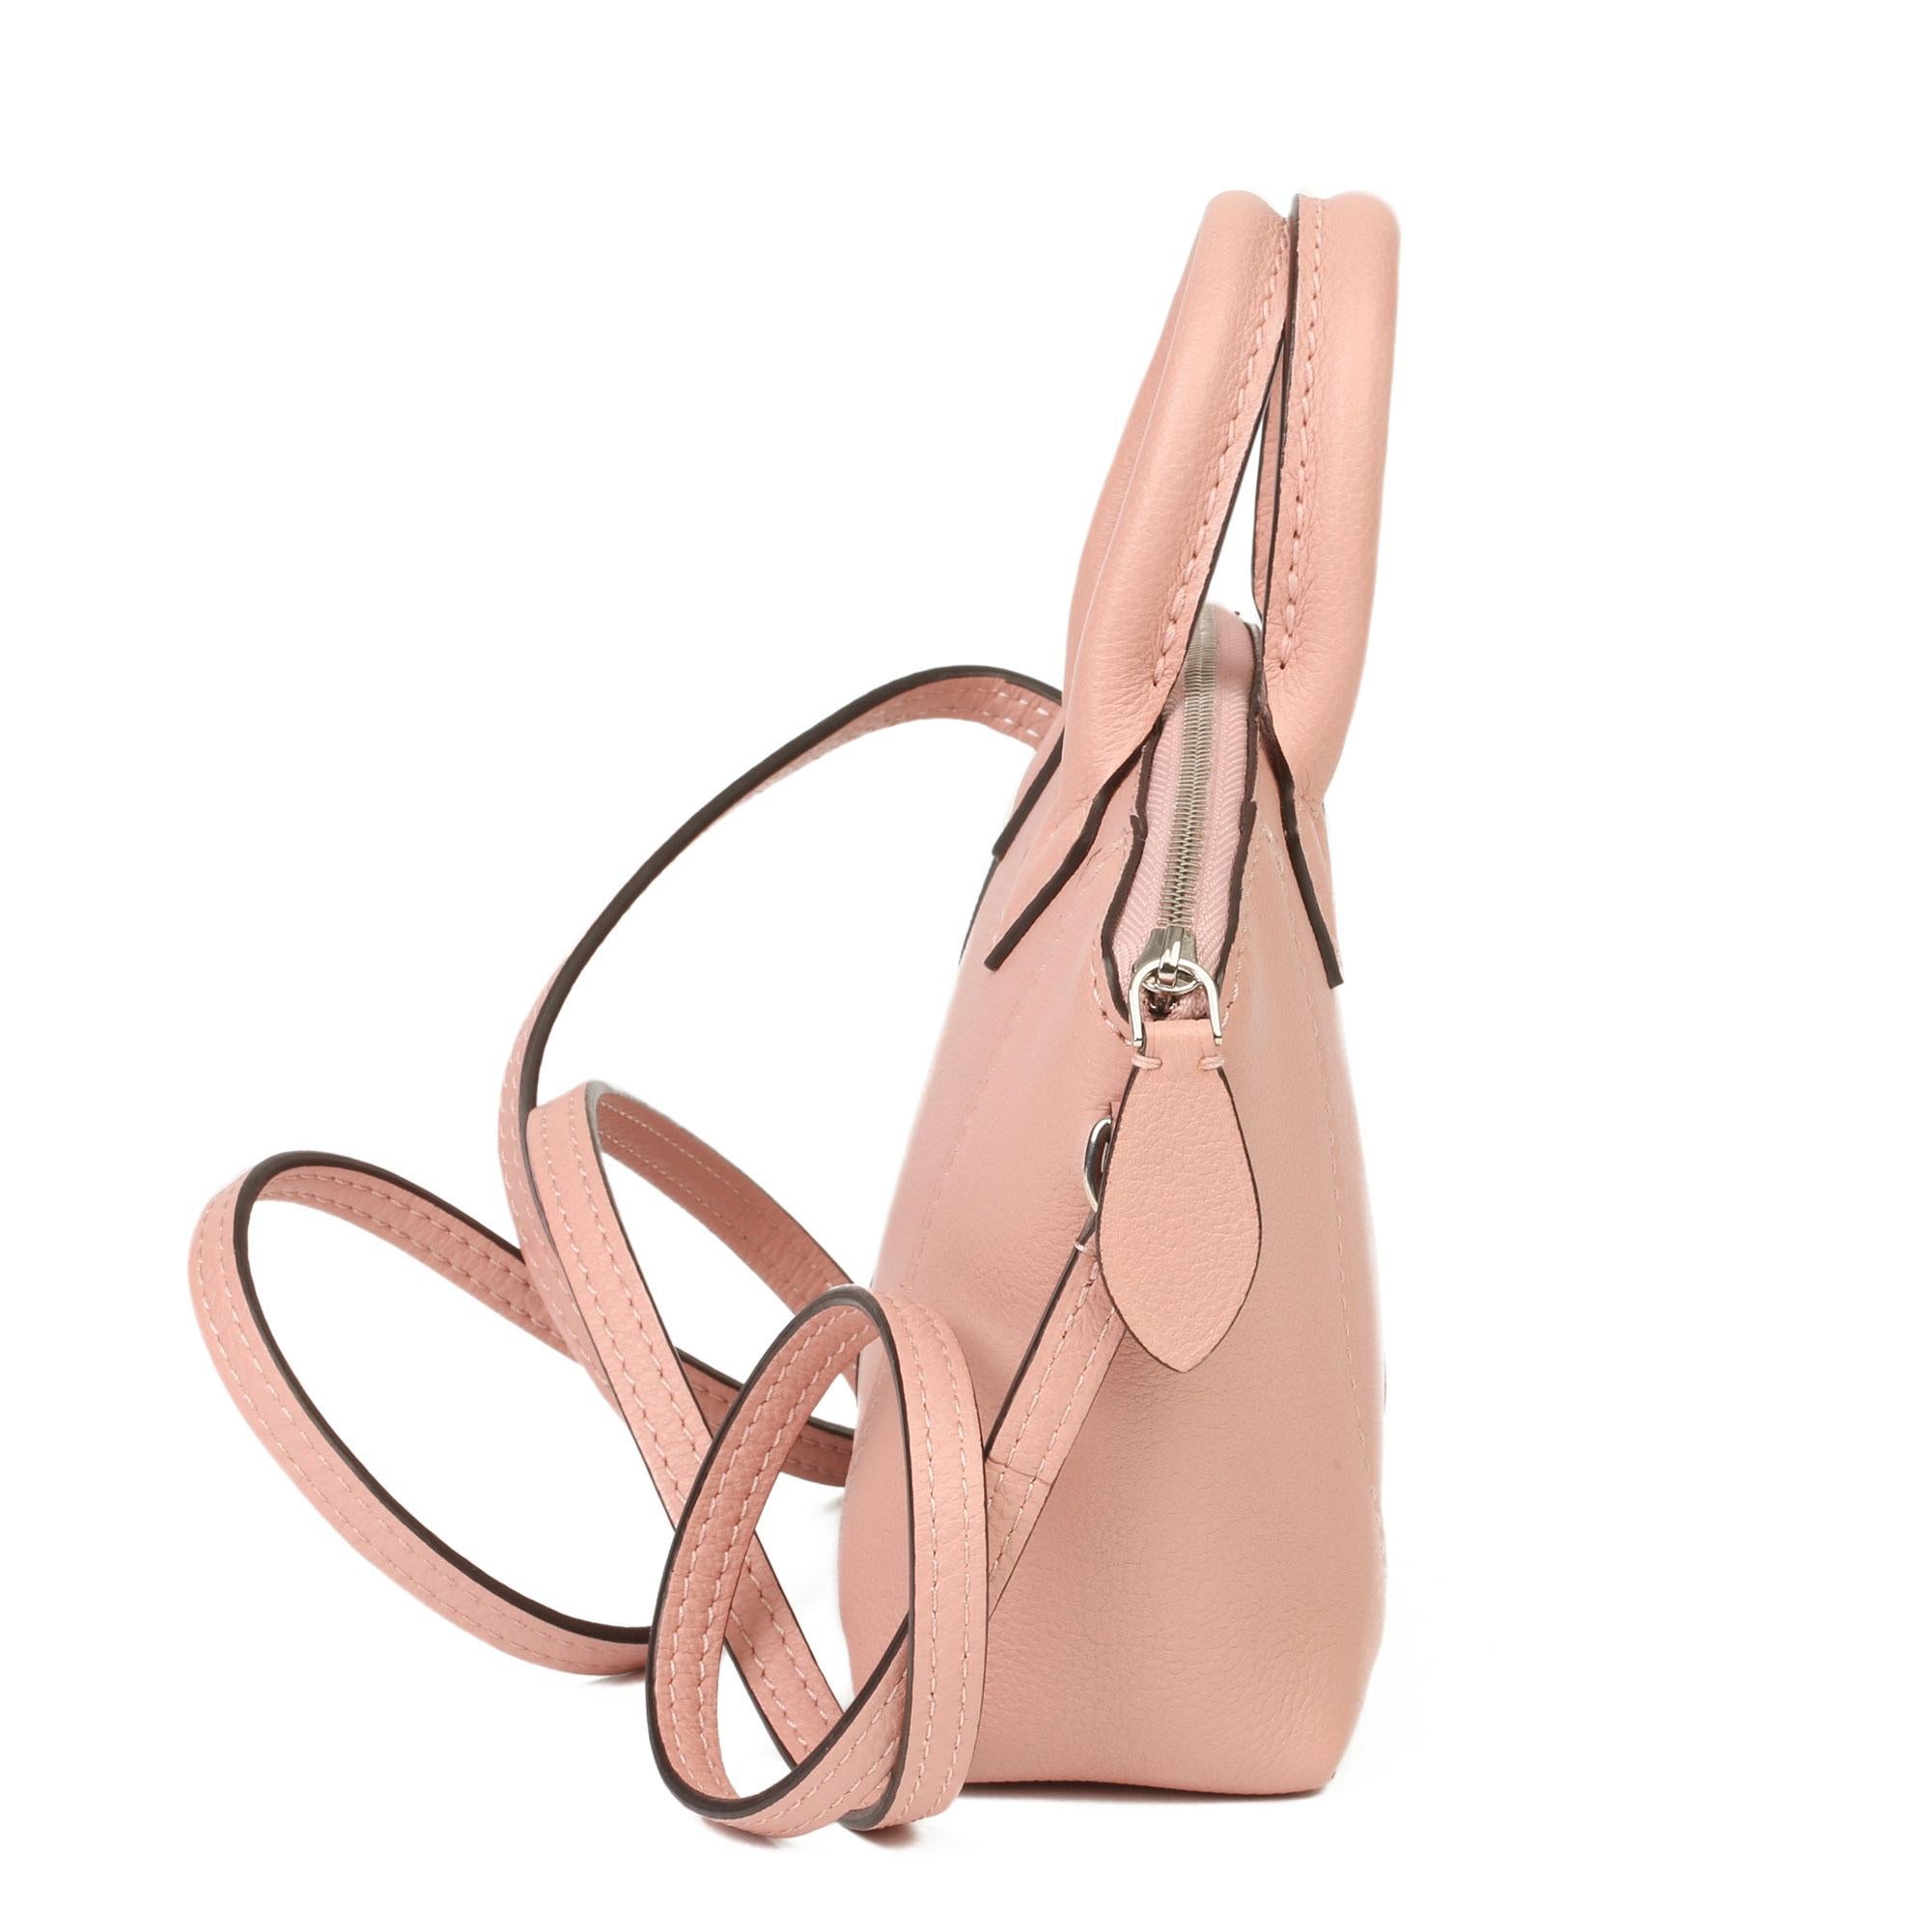 LOUIS VUITTON
Magnolia Veau Cachemire Leather Nano Rock It

Serial Number: AH2145
Age (Circa): 2015
Authenticity Details: Date Stamp (Made in France) 
Gender: Ladies
Type: Shoulder, Tote, Crossbody

Colour: Magnolia
Hardware: Silver
Material(s):